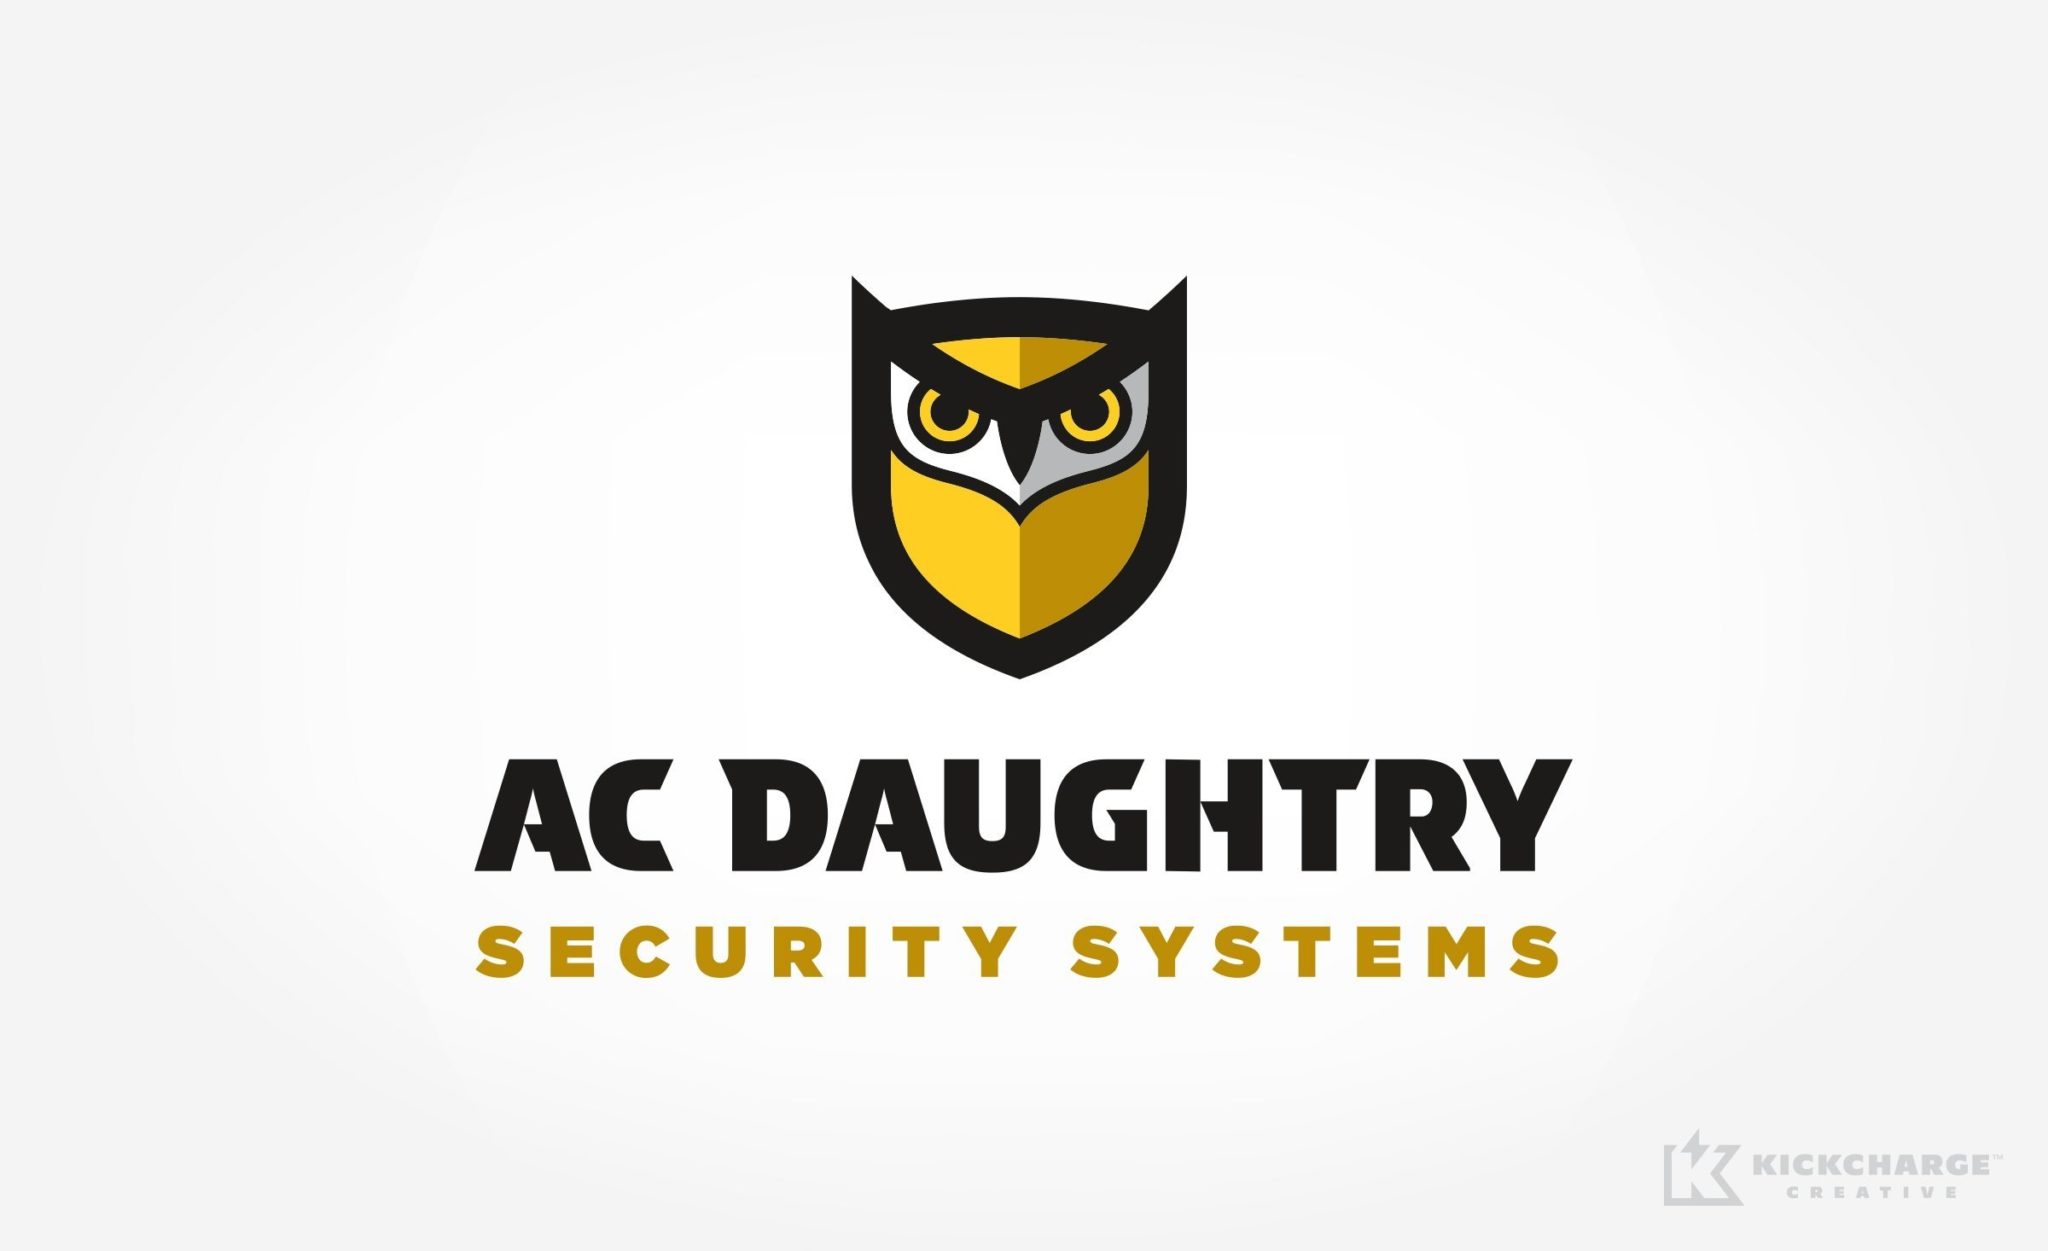 A.C. Daughtry Security Systems